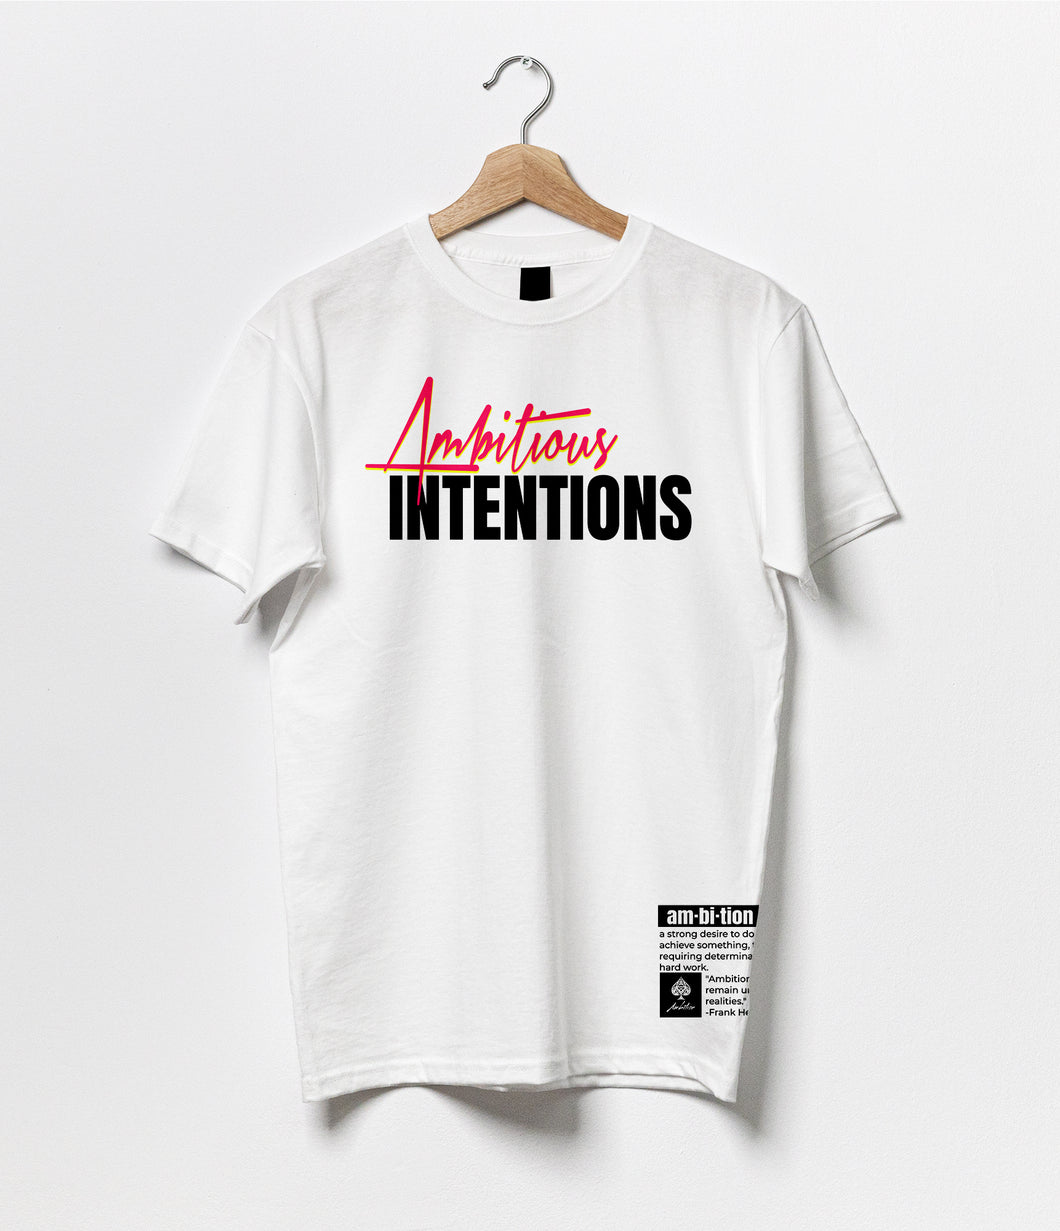 'Ambitious Intentions' Cotton Tee